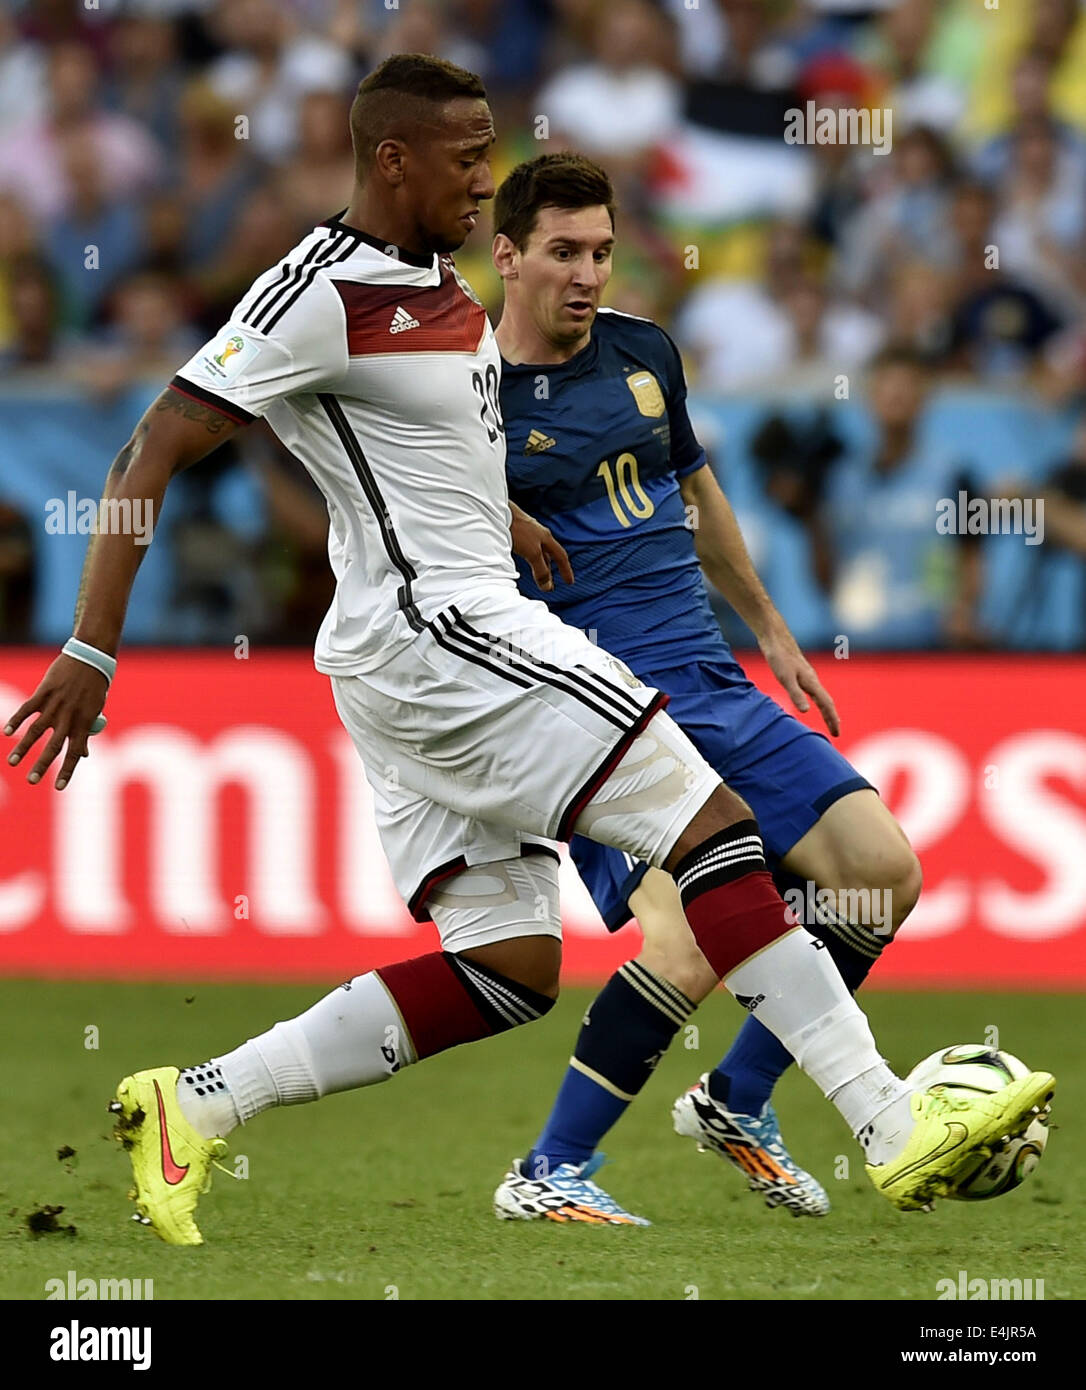 Rio De Janeiro, Brazil. 13th July, 2014. Germany's Jerome Boateng (L) controls the ball against Argentina's Lionel Messi during the final match between Germany and Argentina of 2014 FIFA World Cup at the Estadio do Maracana Stadium in Rio de Janeiro, Brazil, on July 13, 2014. Credit:  Qi Heng/Xinhua/Alamy Live News Stock Photo